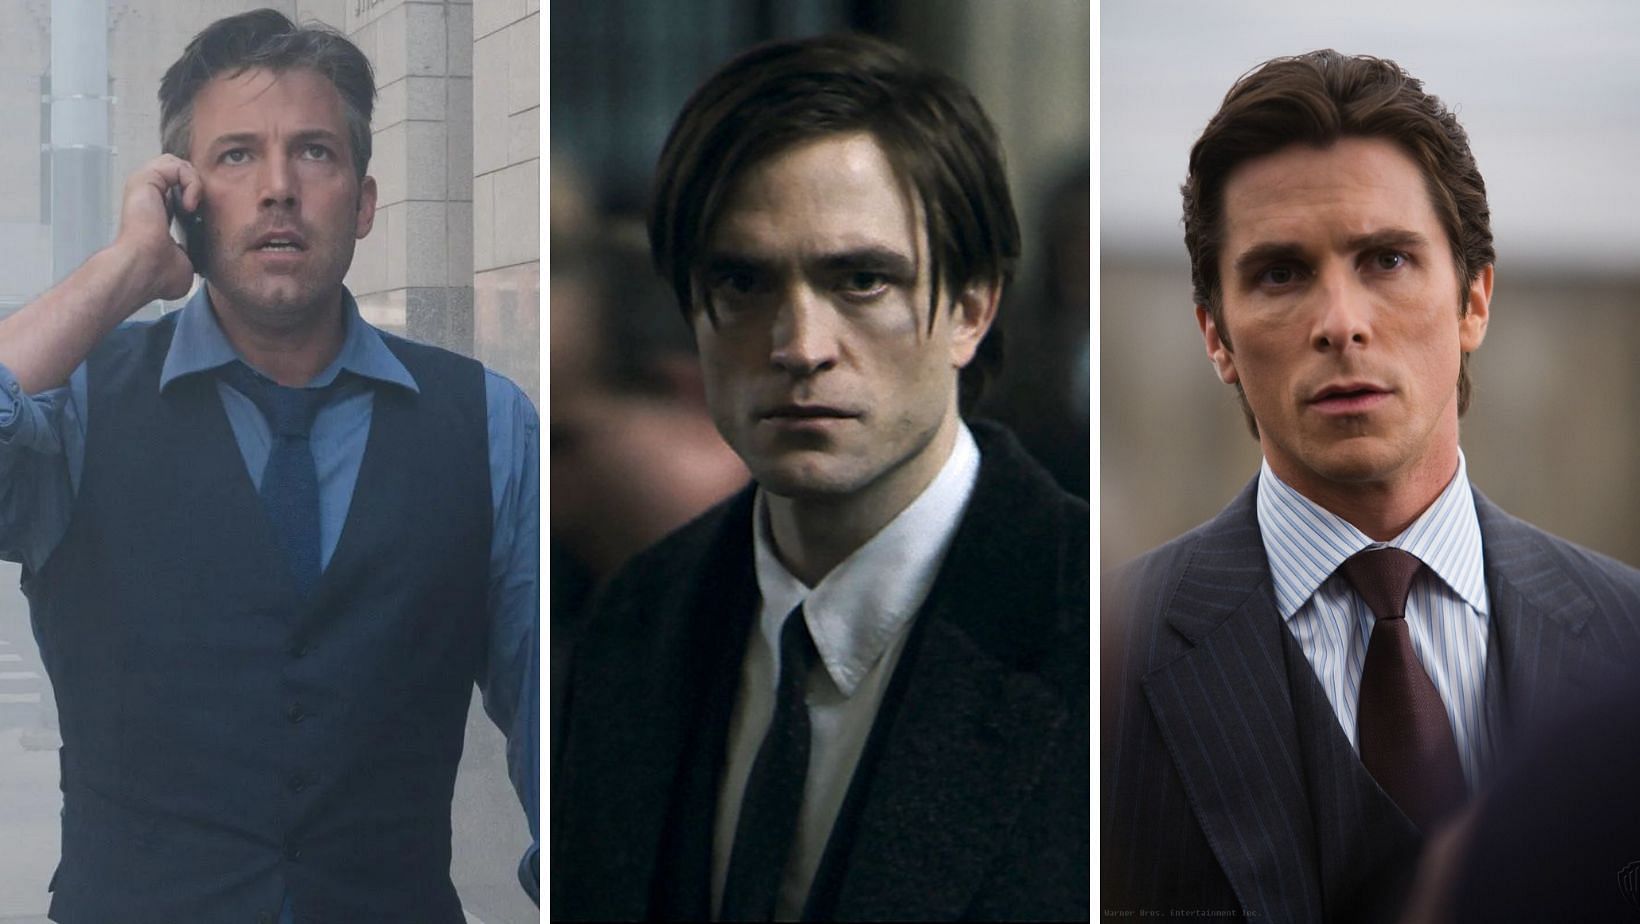 Bruce Wayne&#039;s portrayal over the years (left to right): Ben Affleck, Robert Pattinson, and Christian Bale (Image via Sportskeeda and Warner Bros.)